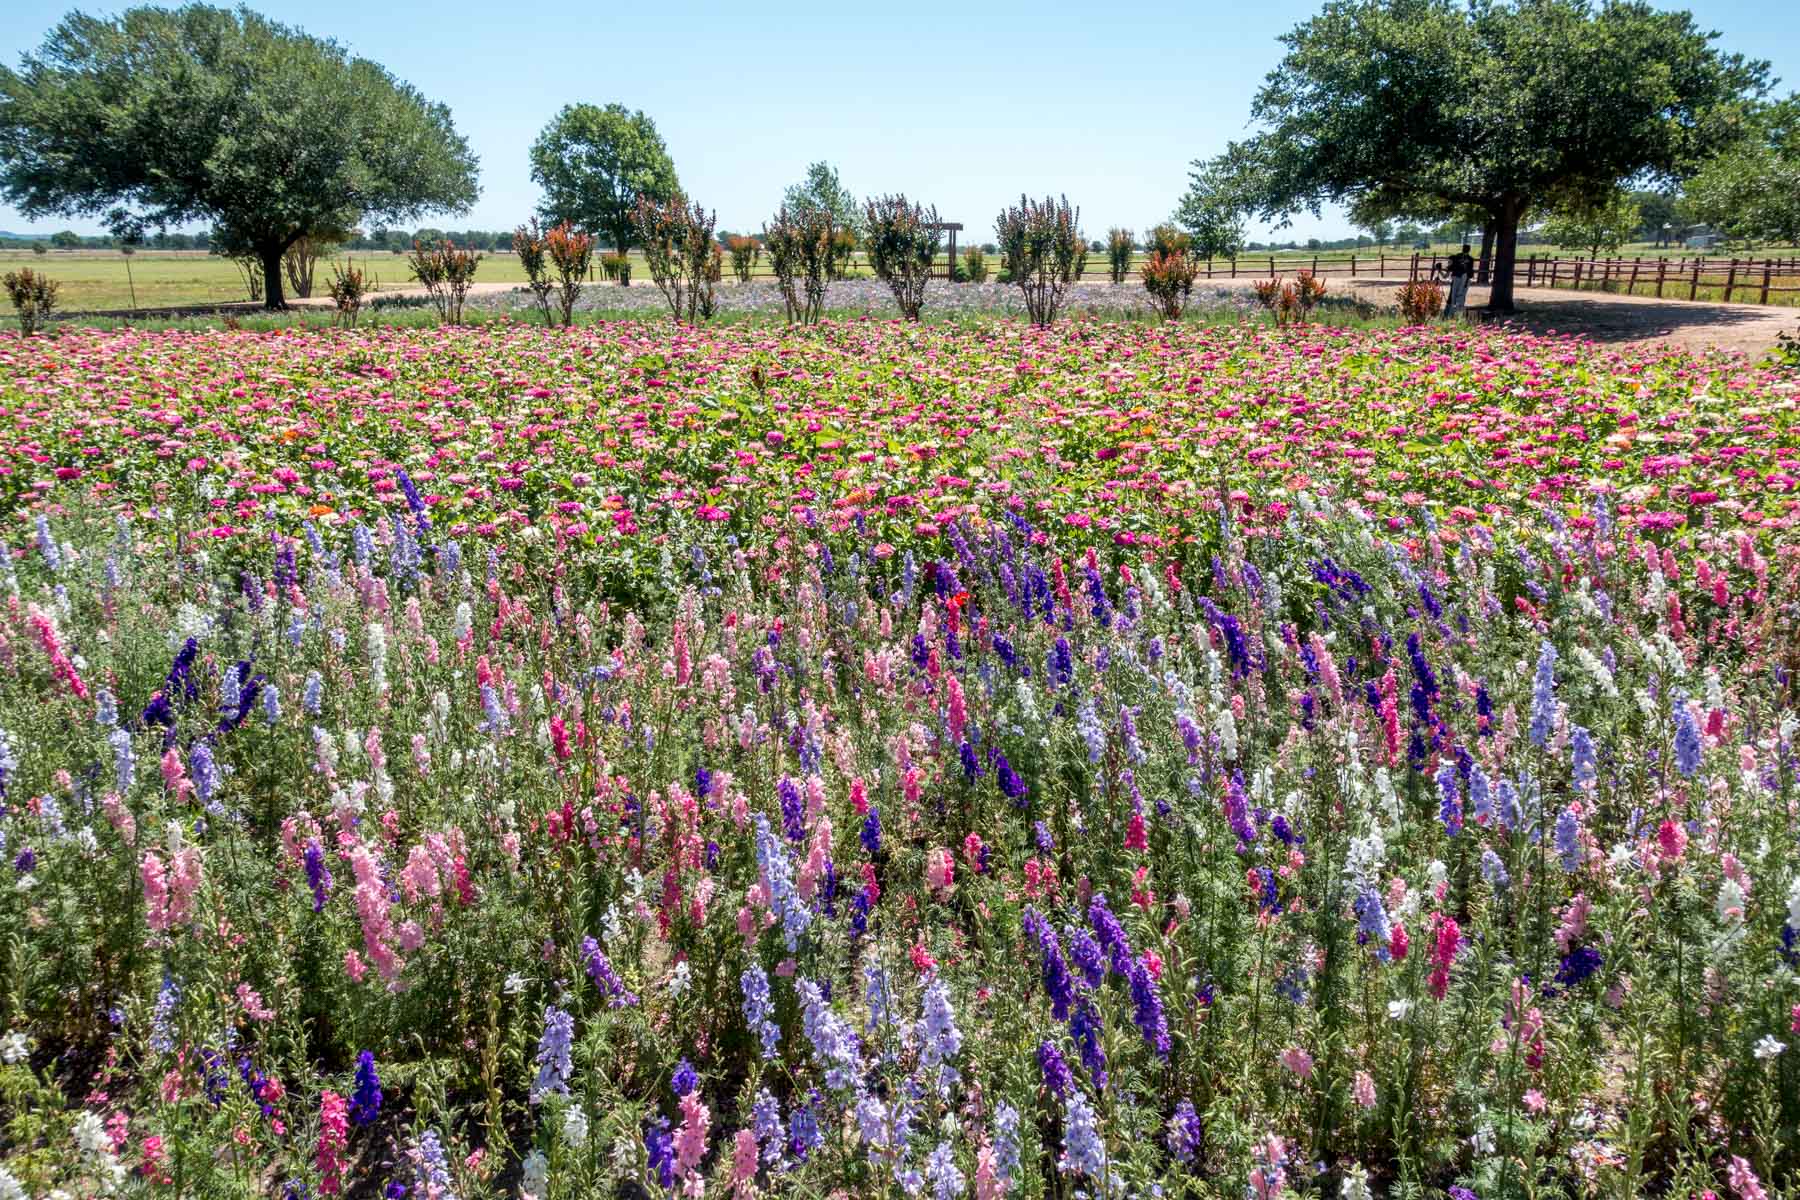 Field of purple, pink, and white wildflowers.